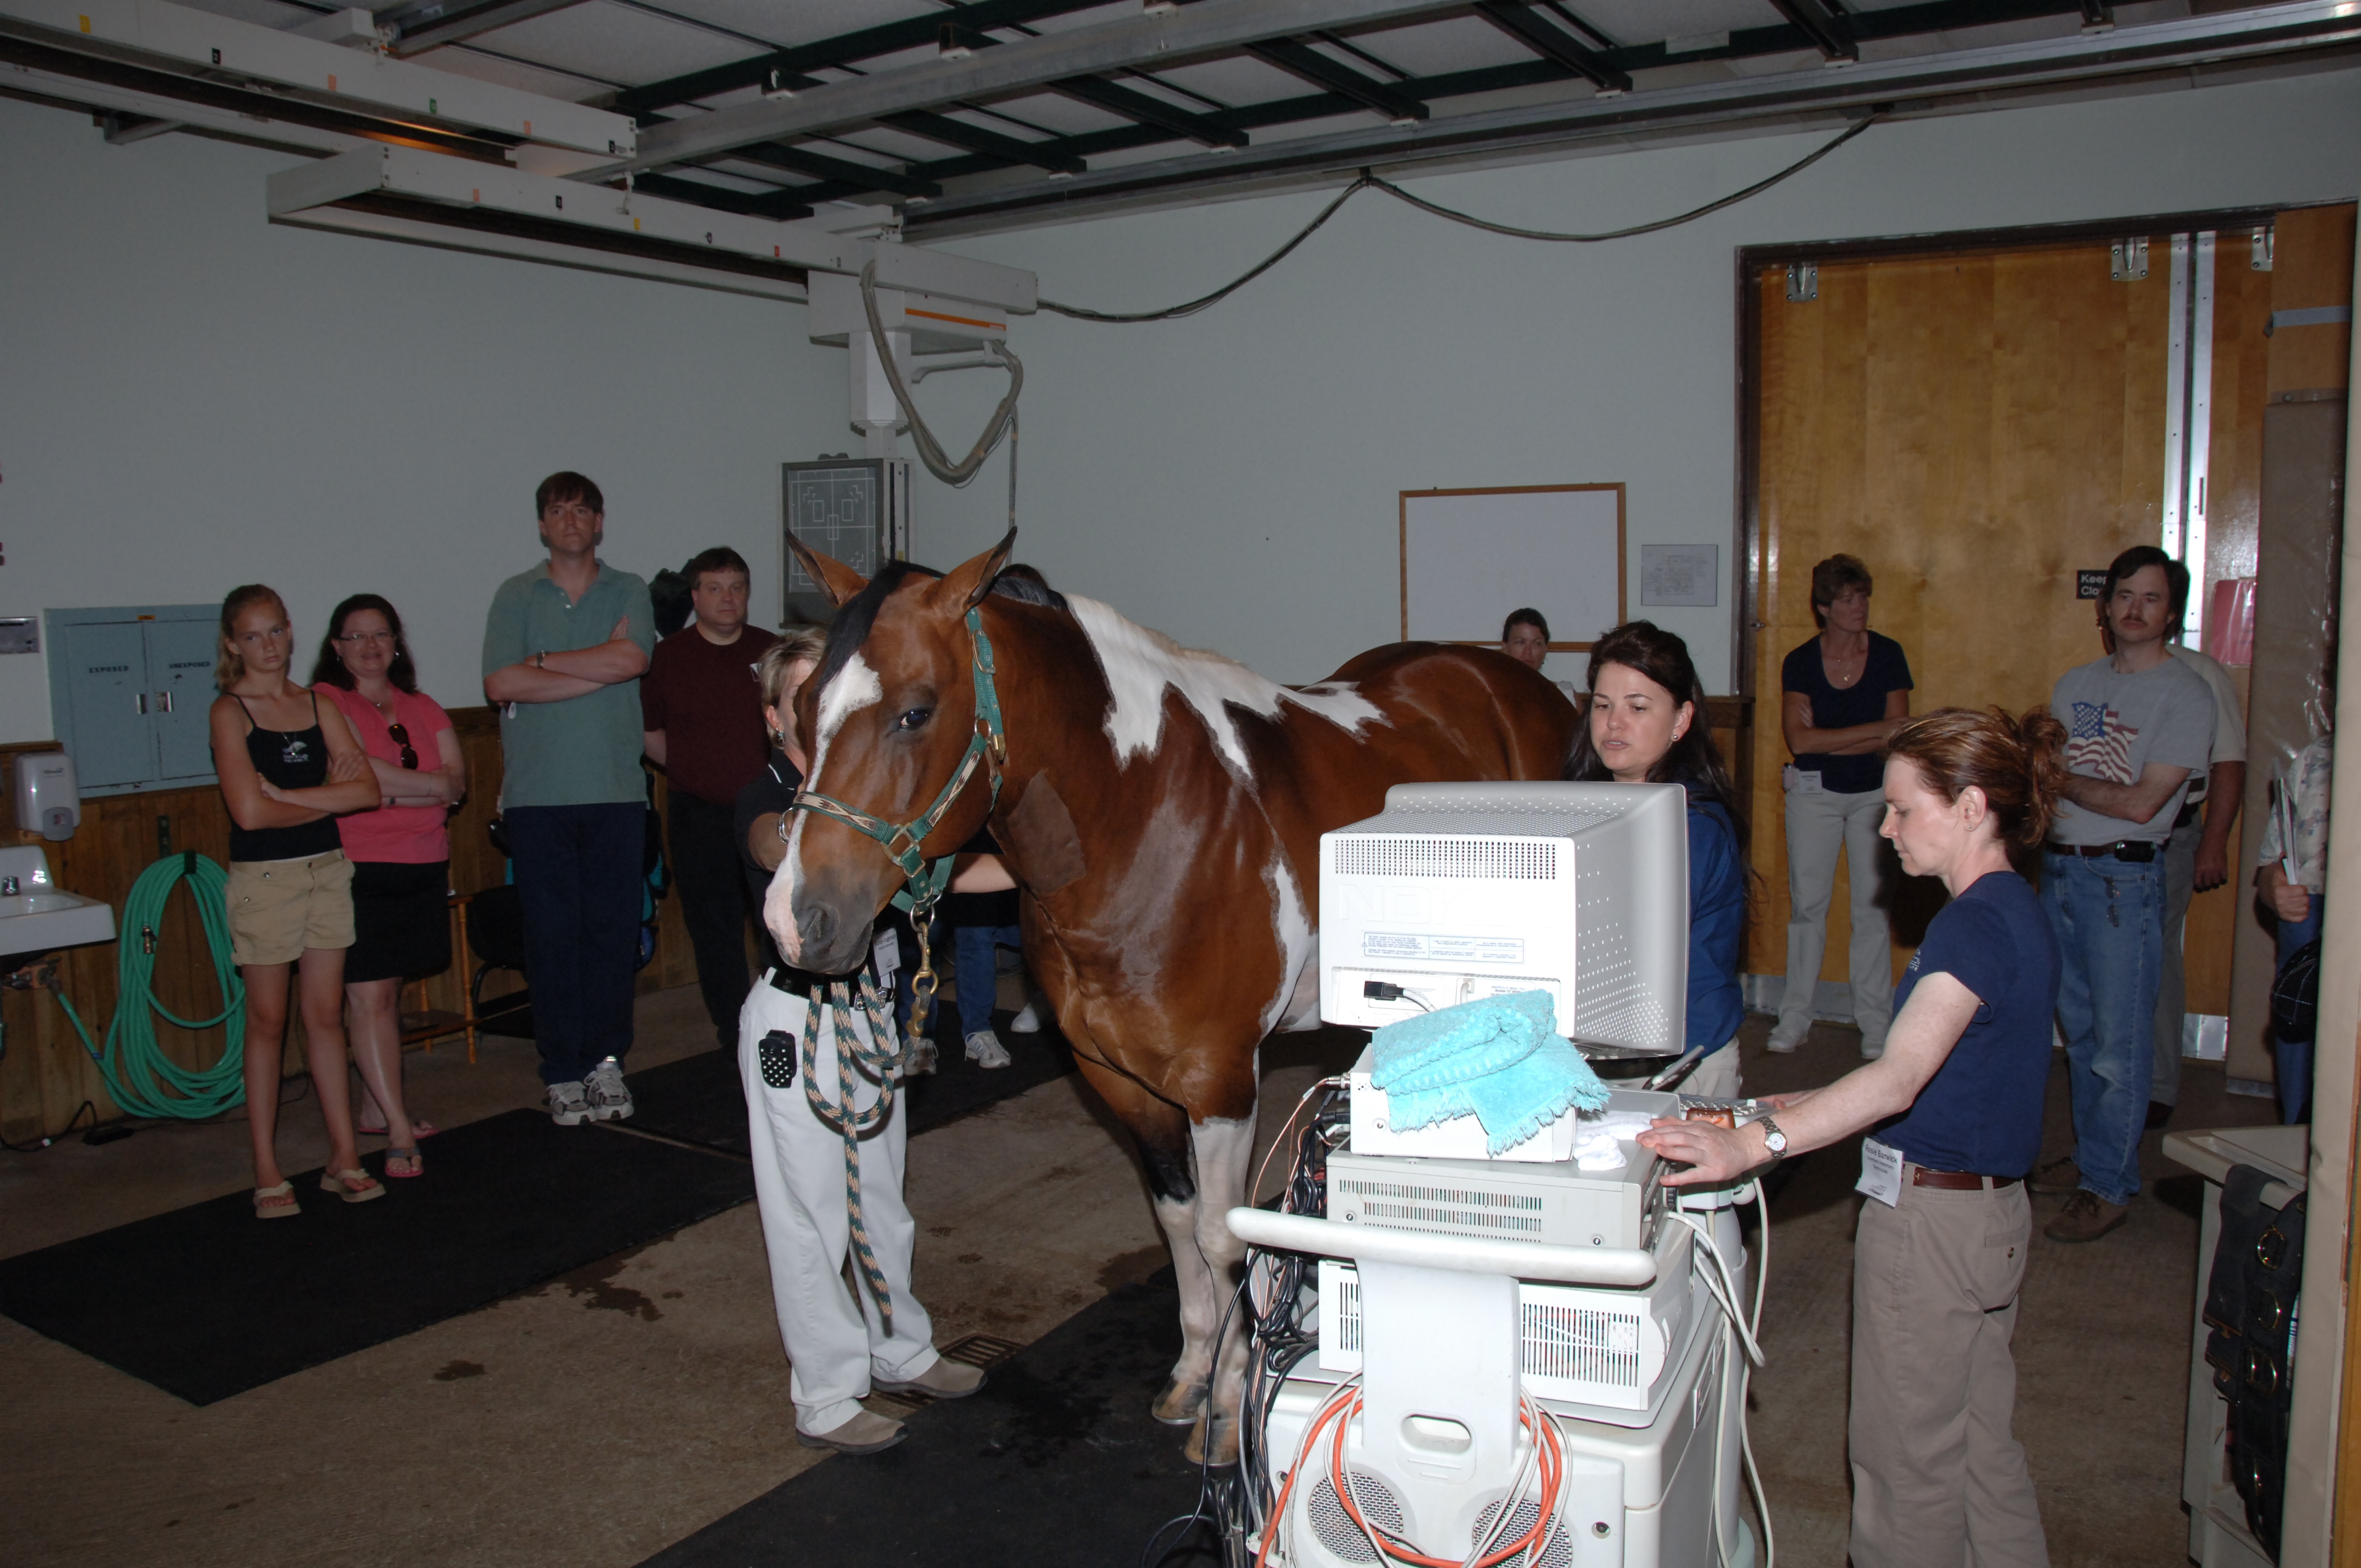 Some of the visitors to the equine medical center's recent open house are able to see how Dr. Anne Desrochers uses state-of-the-art ultrasound equipment to identify health problems in a horse.